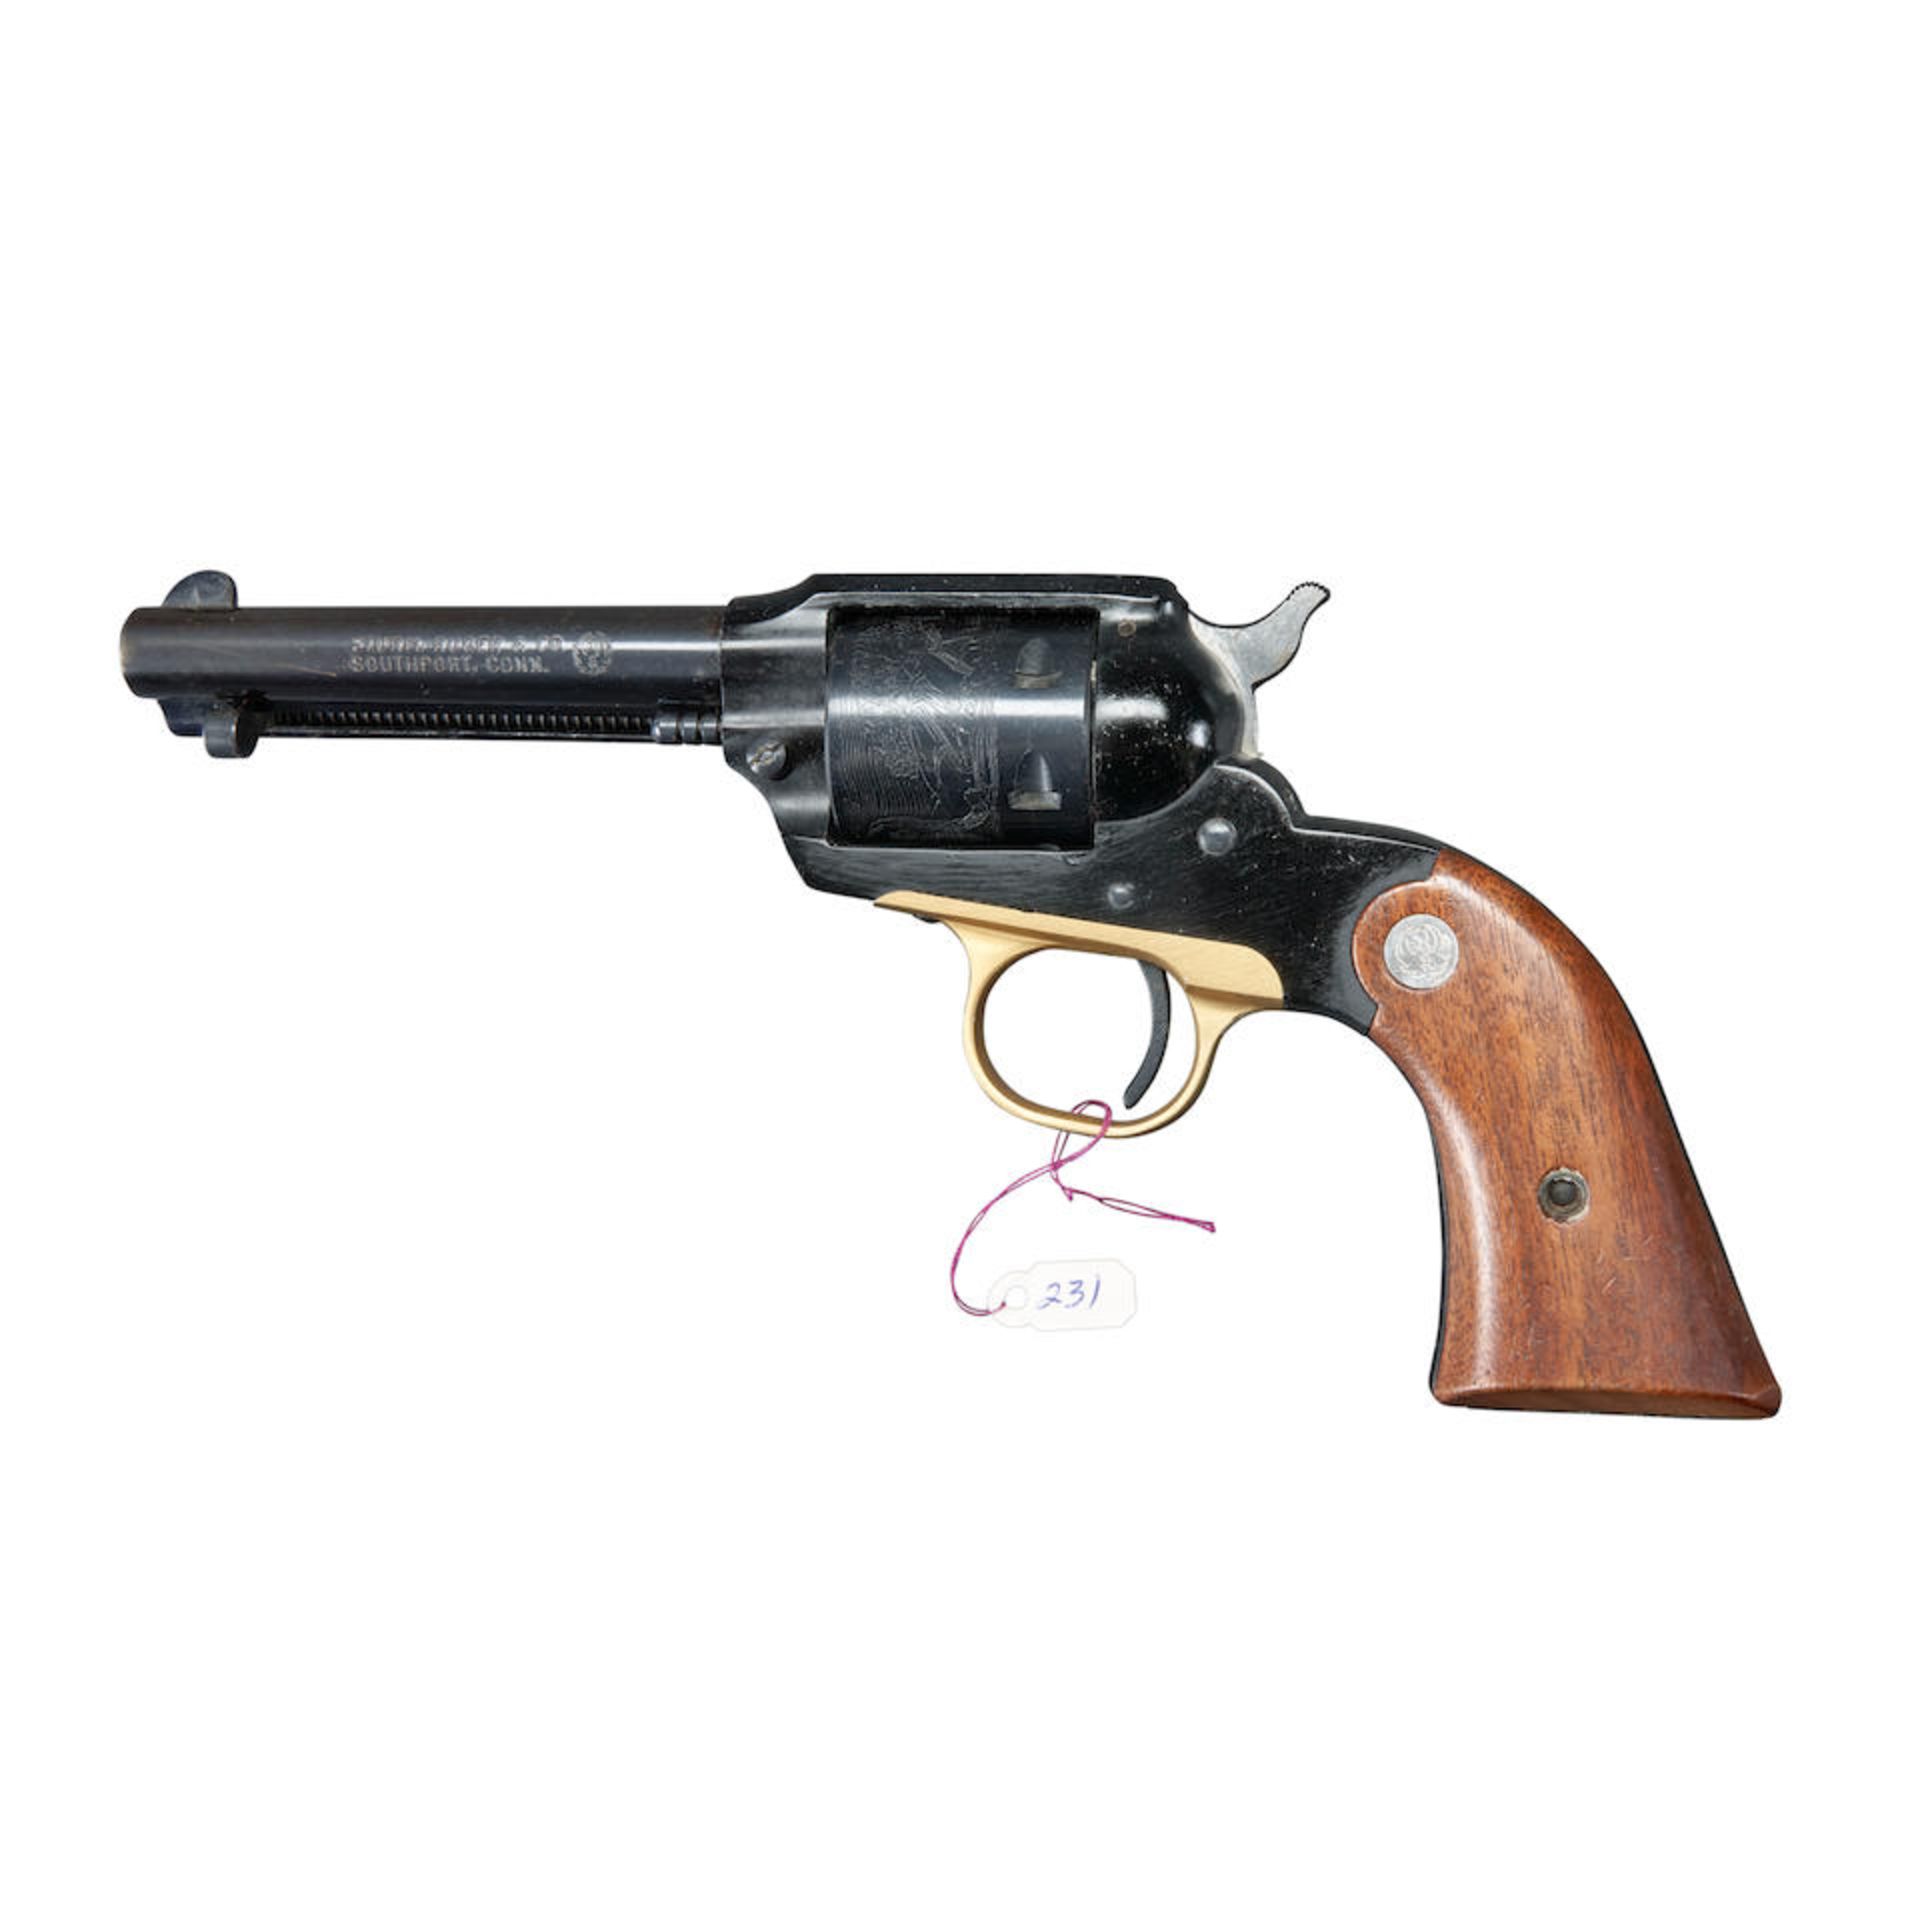 Ruger Bearcat Duplicate Serial Number Single Action Revolver, Curio or Relic firearm - Bild 4 aus 5